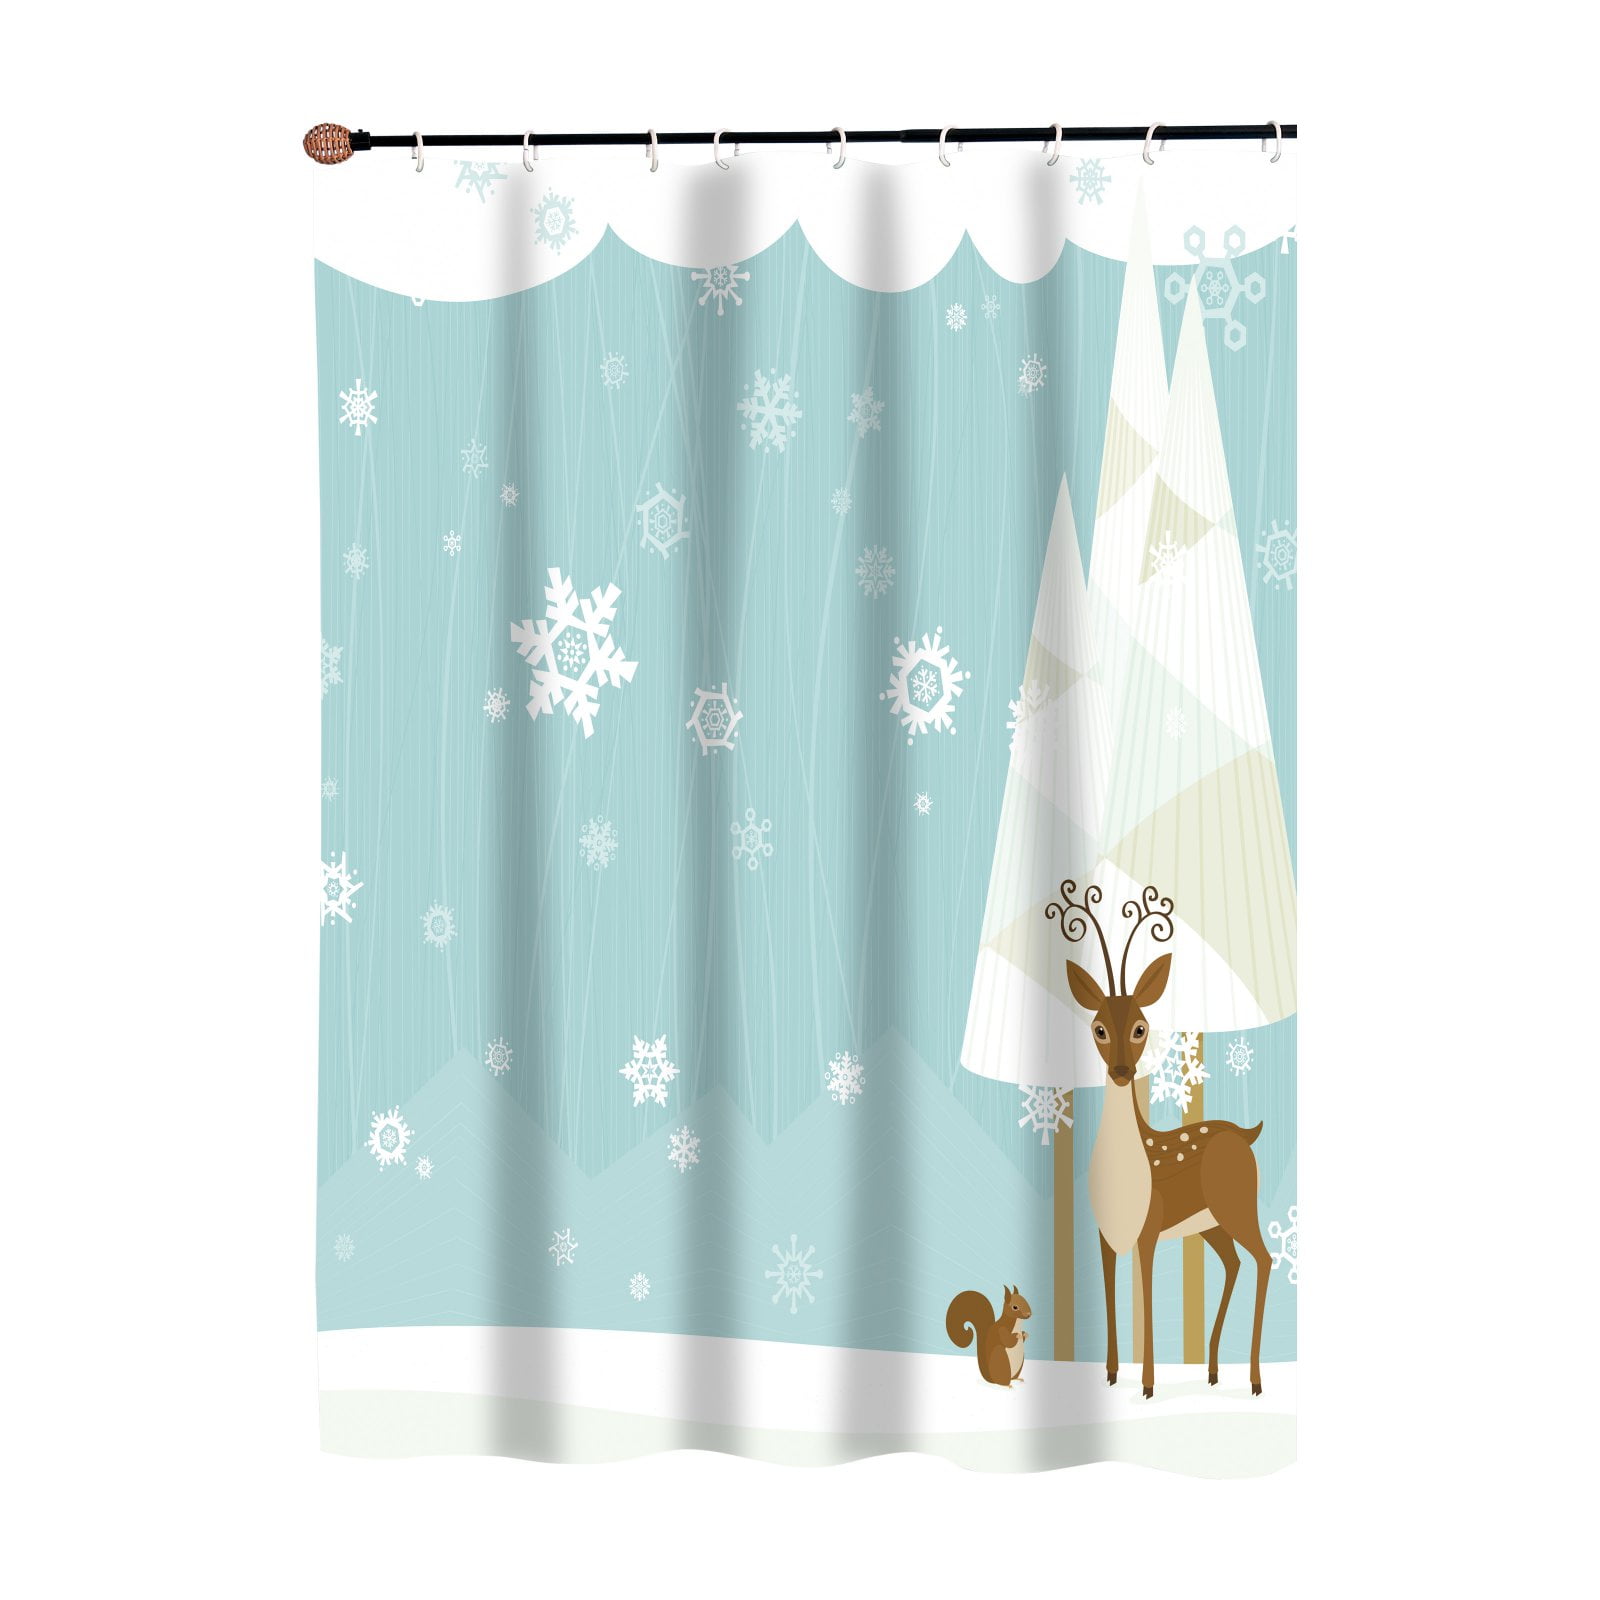 Carnation "Deck the Halls" Fabric Shower Curtain 70x72 holiday lights christmas 